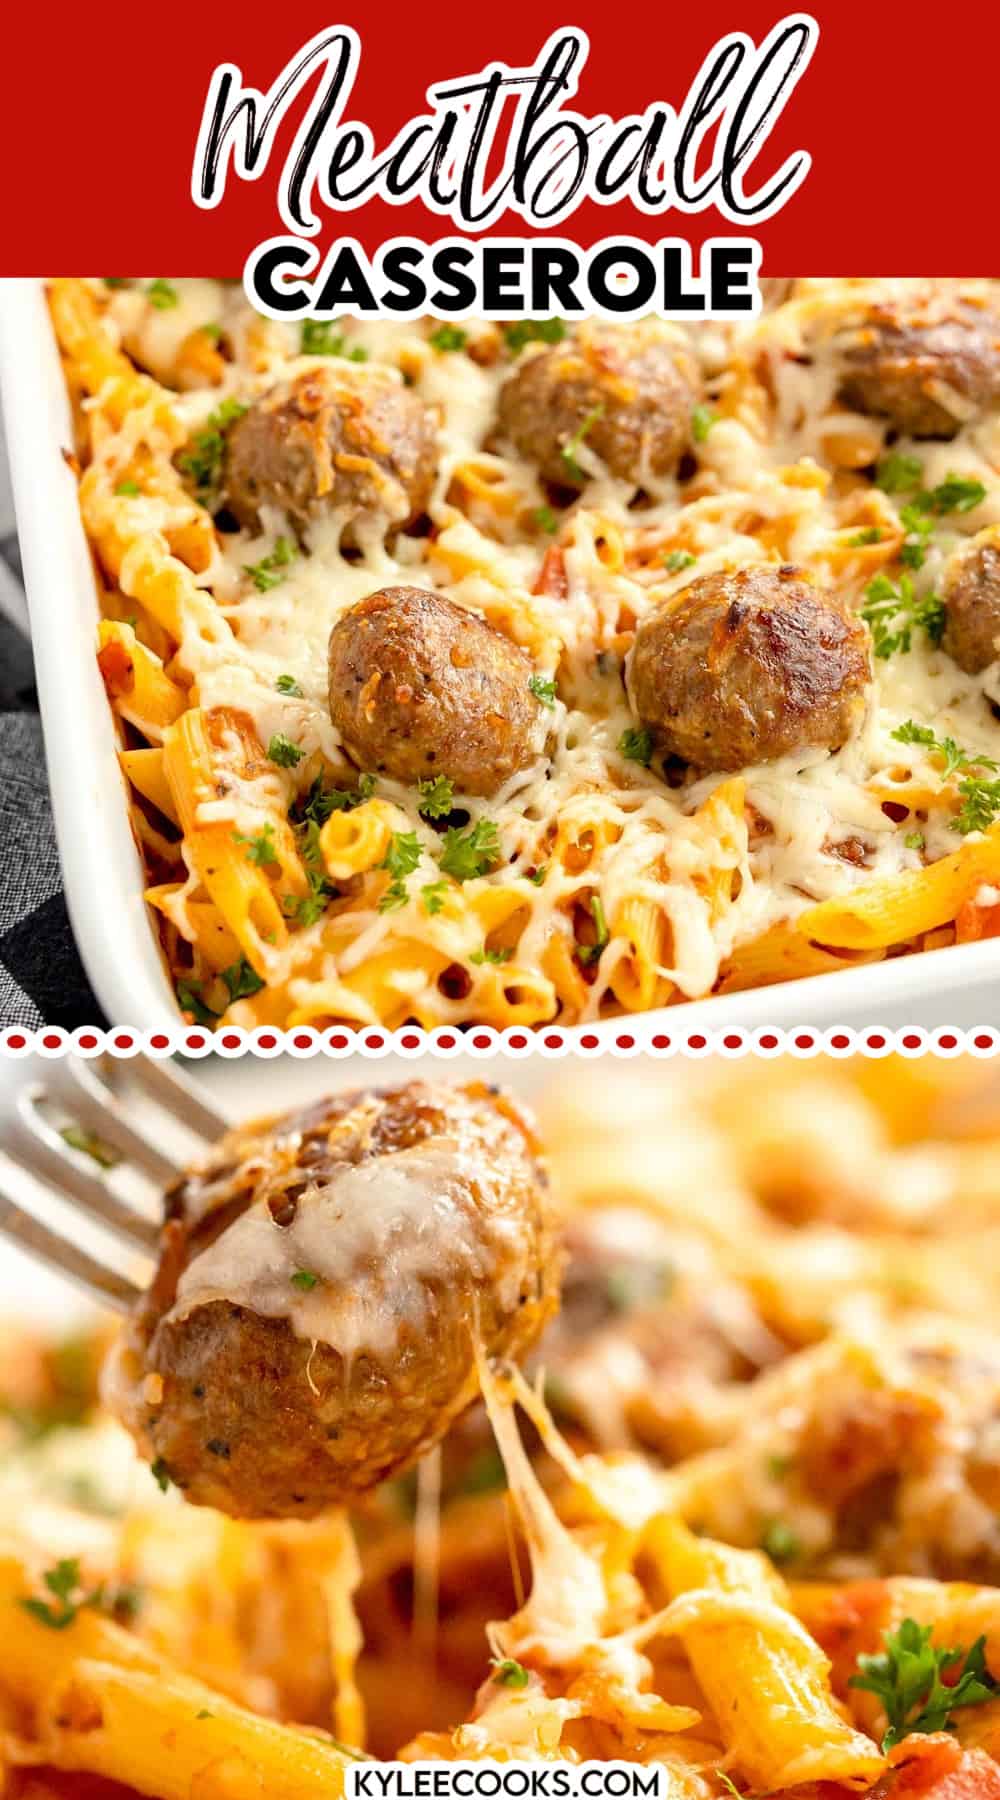 meatball casserole with ingredient list and images, plus recipe name overlaid in text.